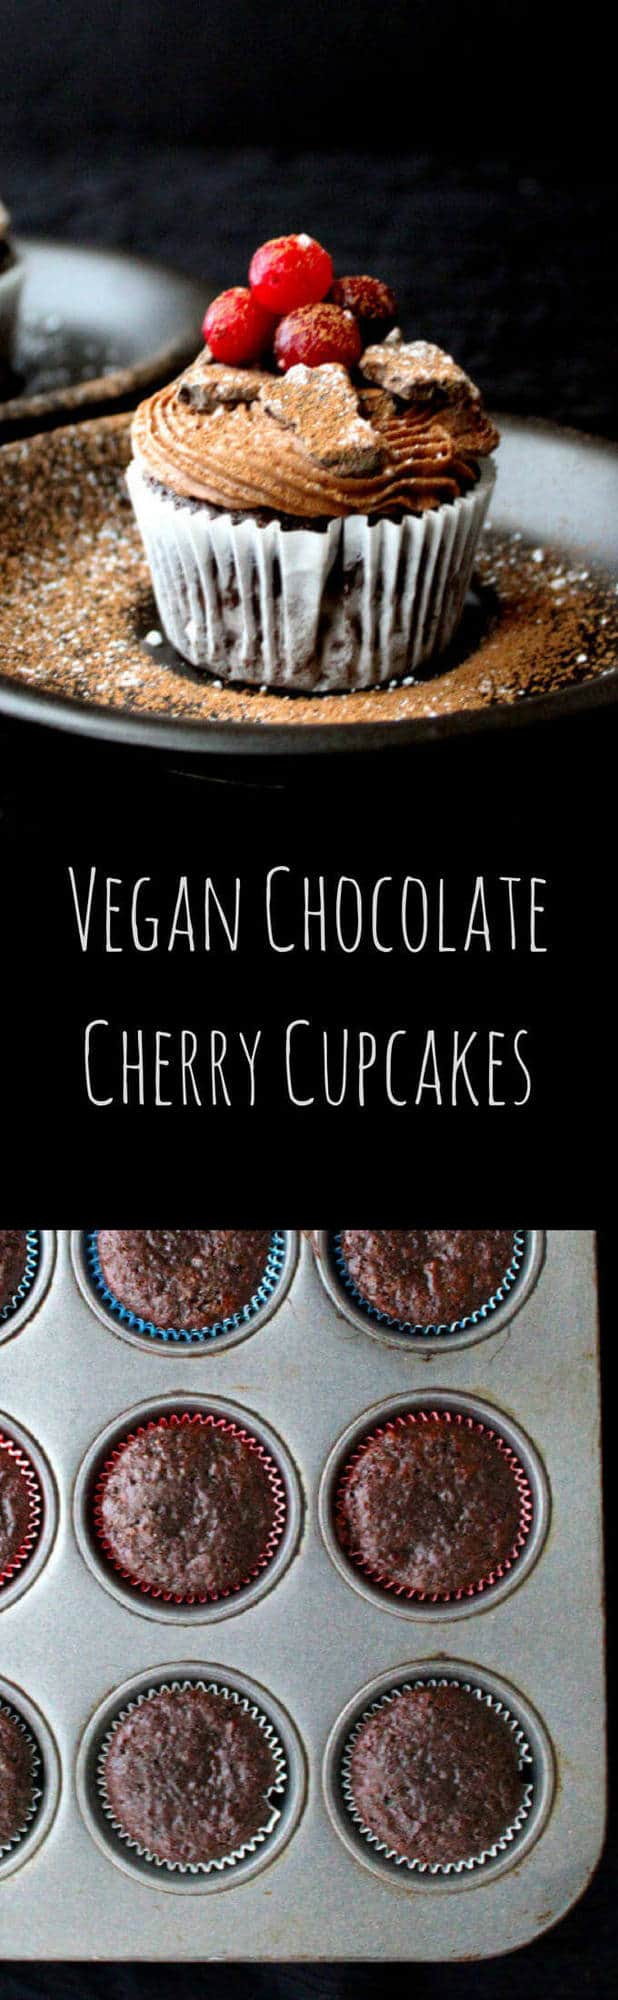 Pin image showing baked cupcakes and  decorated cupcakes with an inlay that reads "vegan chocolate cherry cupcakes"